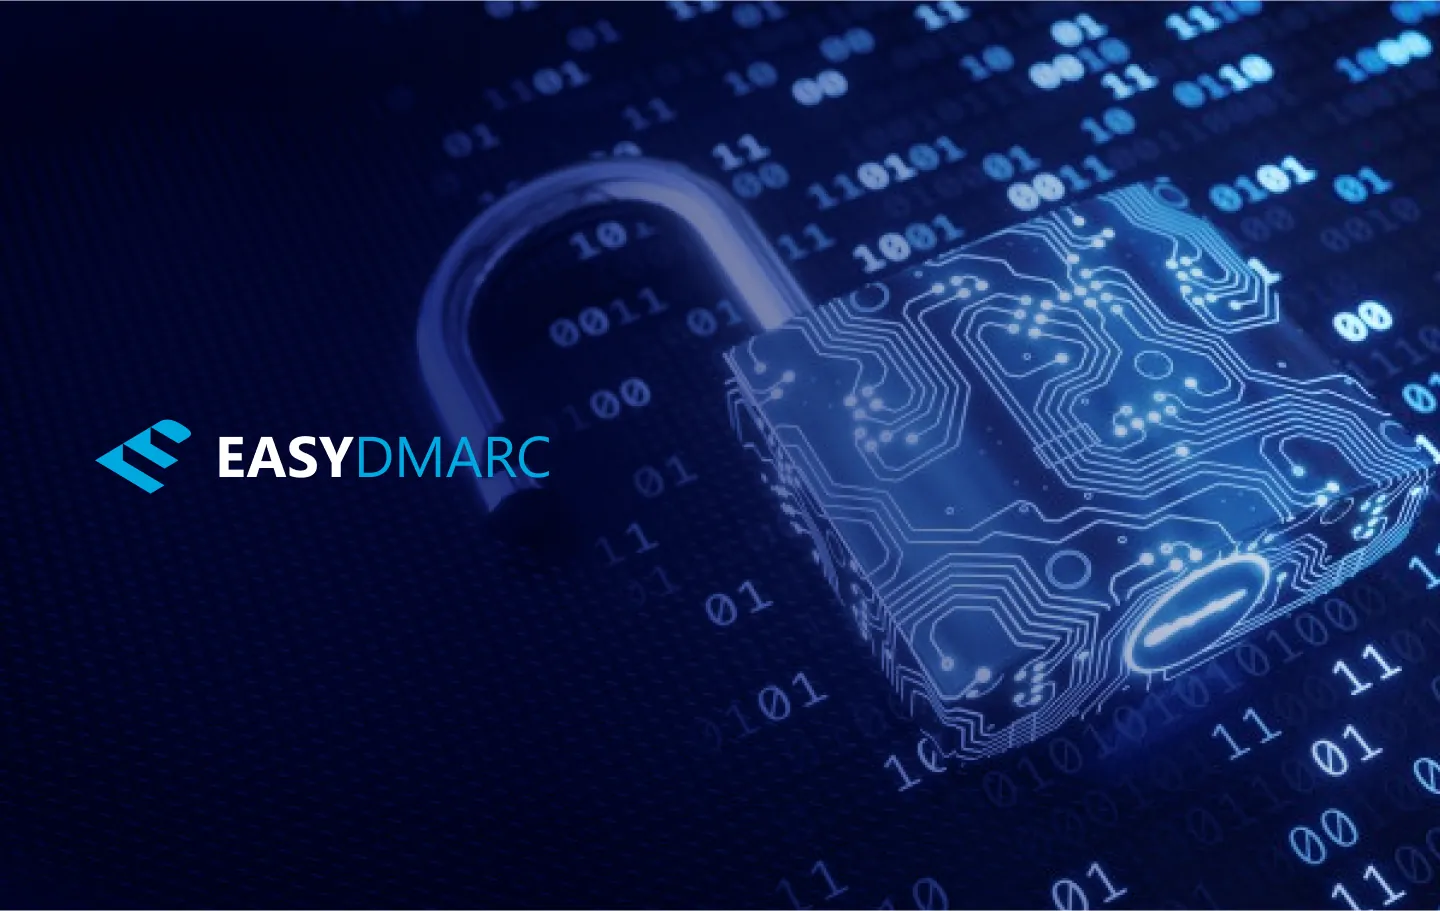 An image of an open lock on a blue background,EasyDMARC logo on the lfet side